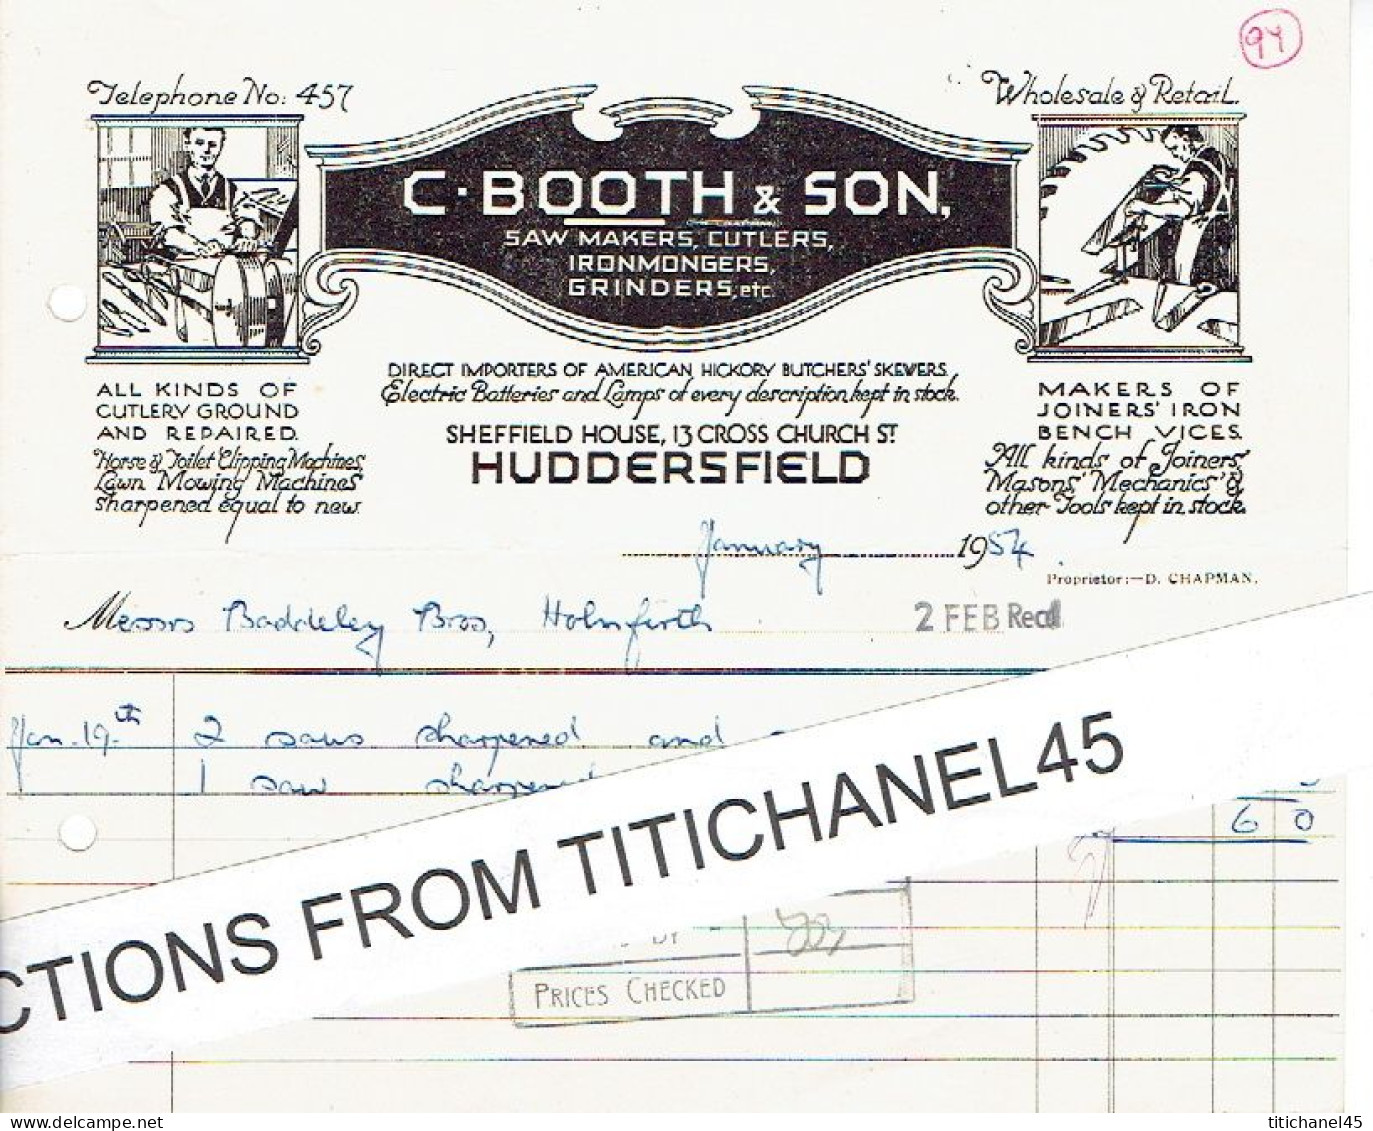 1954 HUDDERSFIELD - Invoice From C. BOOTH & SON - Saw Makers, Cutlers, Ironmongers, Grinders... - United Kingdom